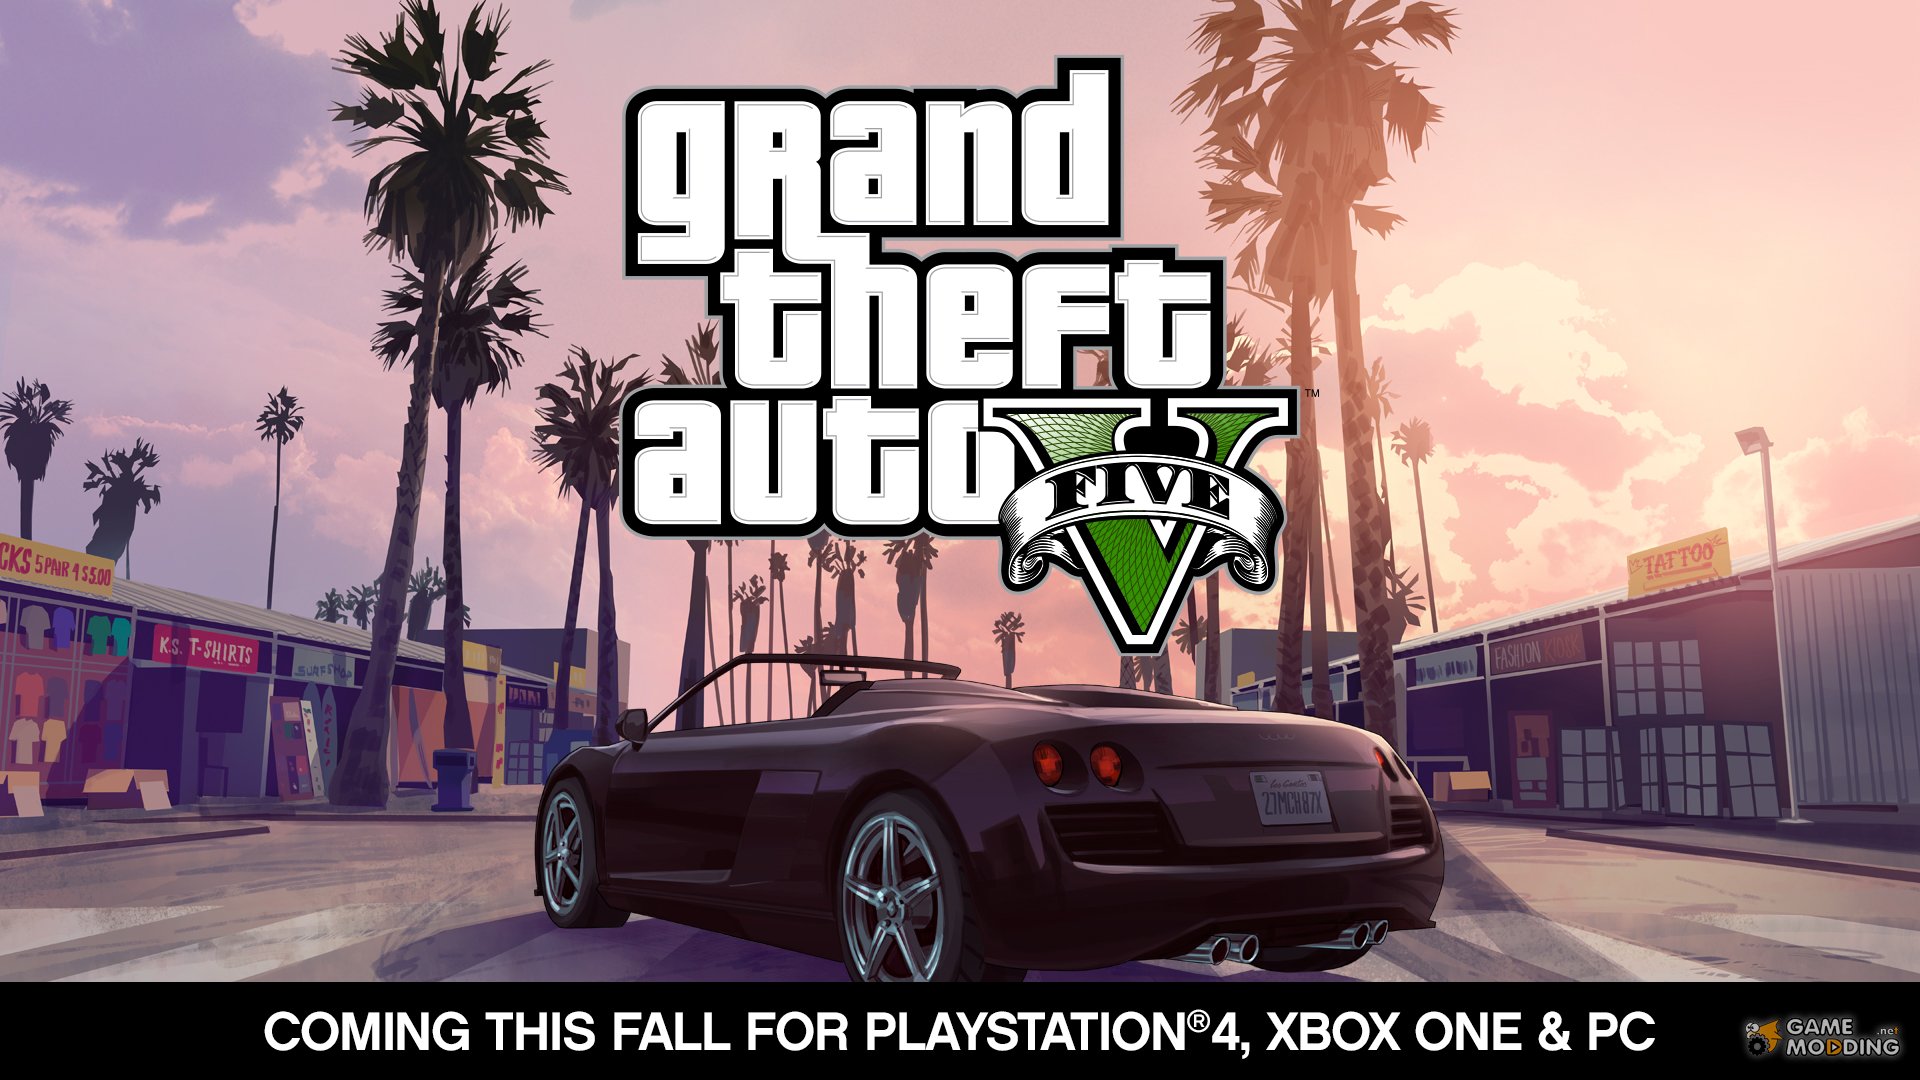 GTA 5 coming out in the fall! Official information!